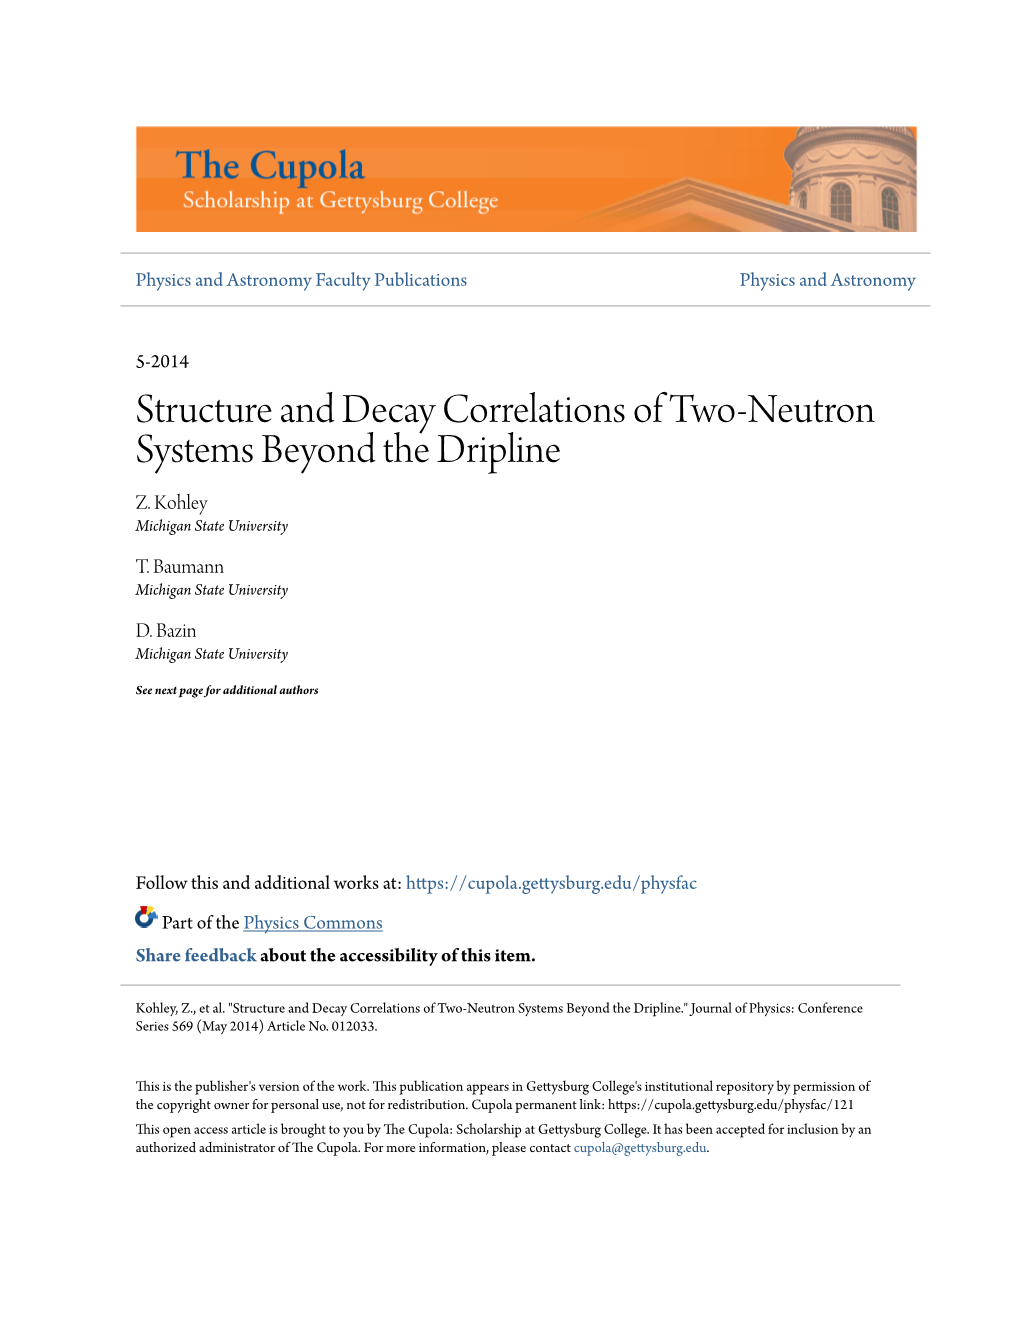 Structure and Decay Correlations of Two-Neutron Systems Beyond the Dripline Z